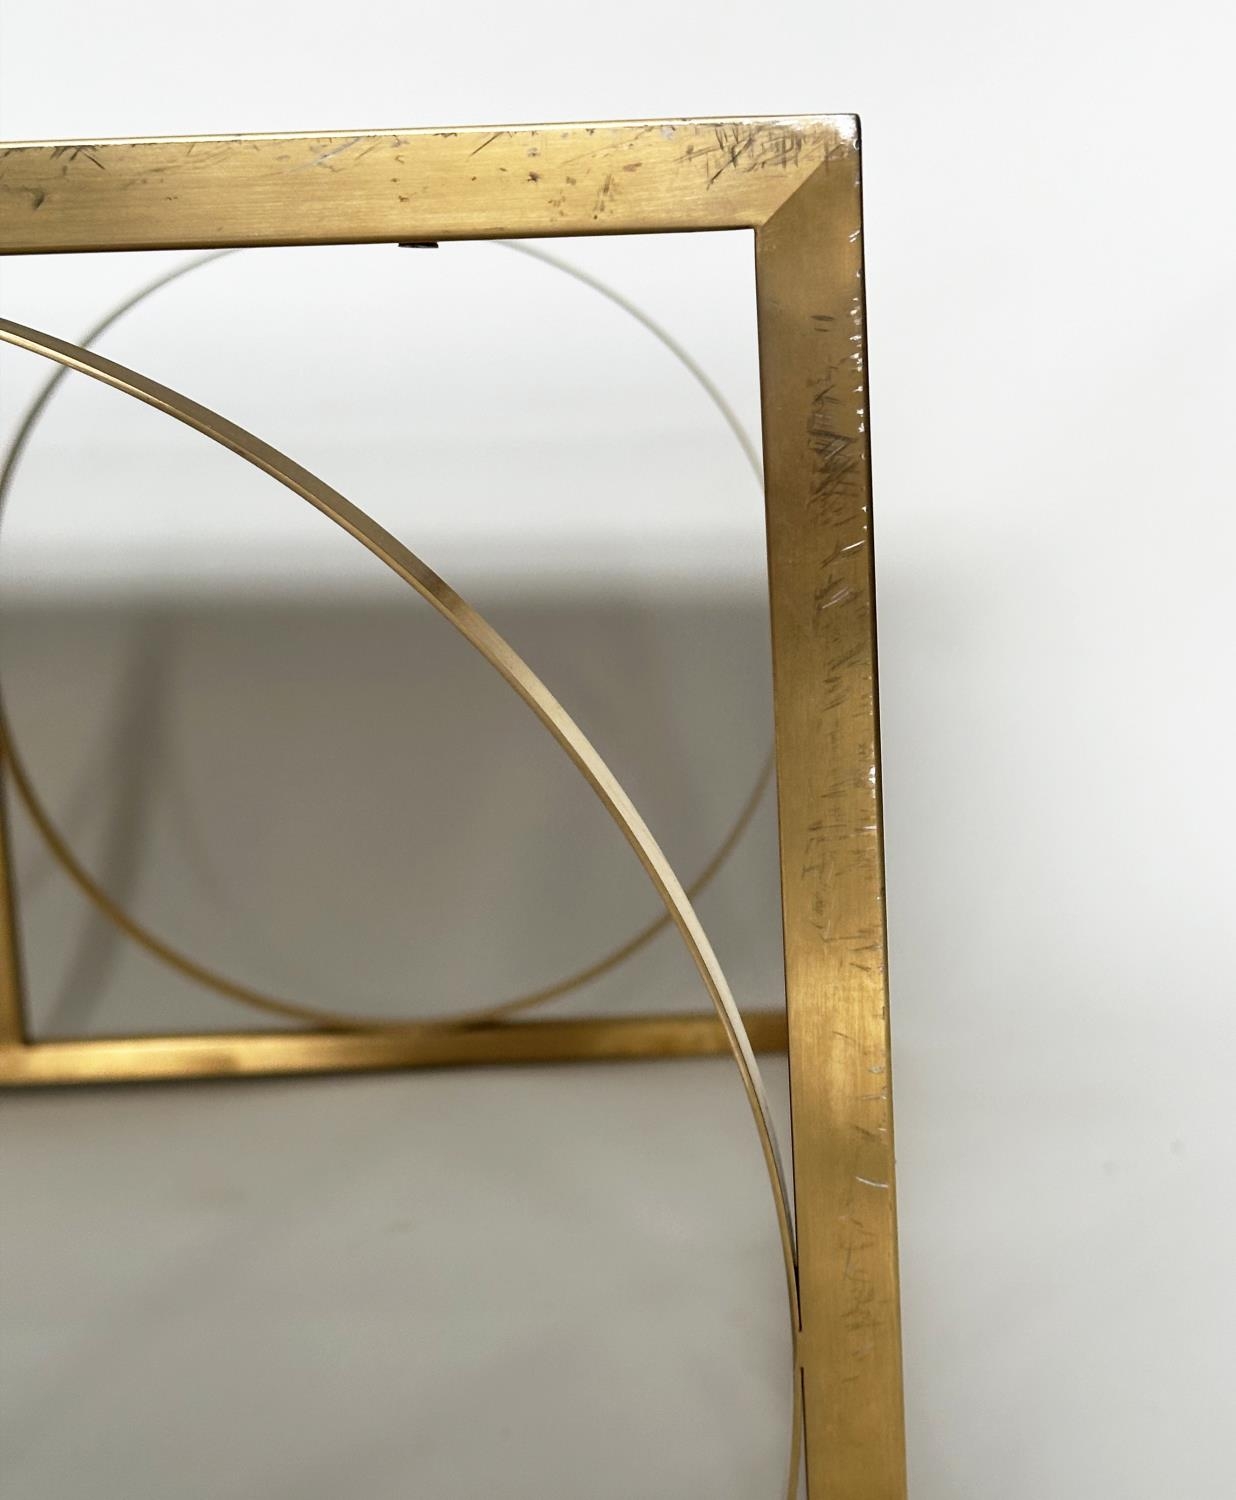 LOW TABLE, square gilded metal framed with reconstituted travertine marble, 88cm x 88cm x 45cm H. - Image 4 of 6